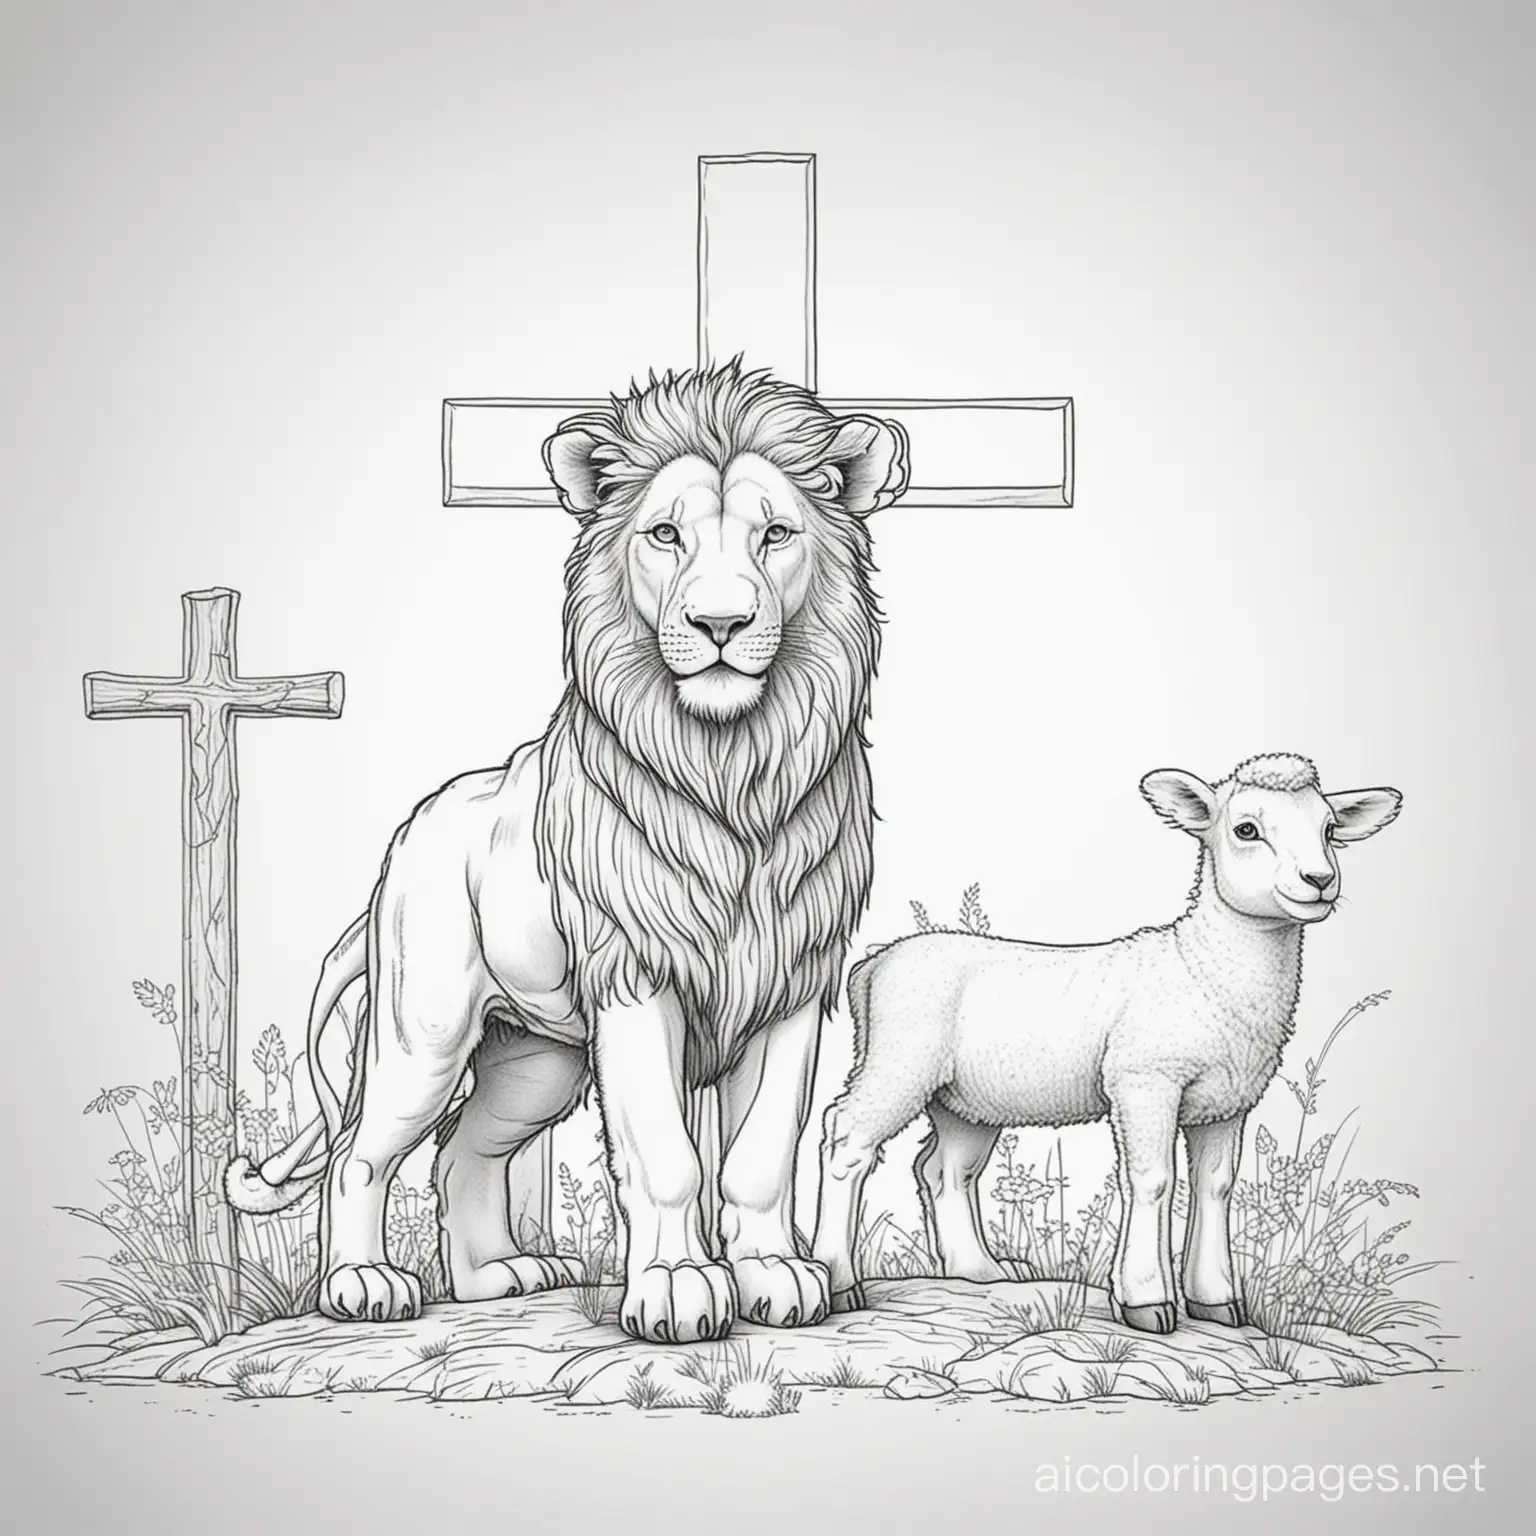 Lion  standing beside a lamb with  cross in the background
, Coloring Page, black and white, line art, white background, Simplicity, Ample White Space. The background of the coloring page is plain white to make it easy for young children to color within the lines. The outlines of all the subjects are easy to distinguish, making it simple for kids to color without too much difficulty